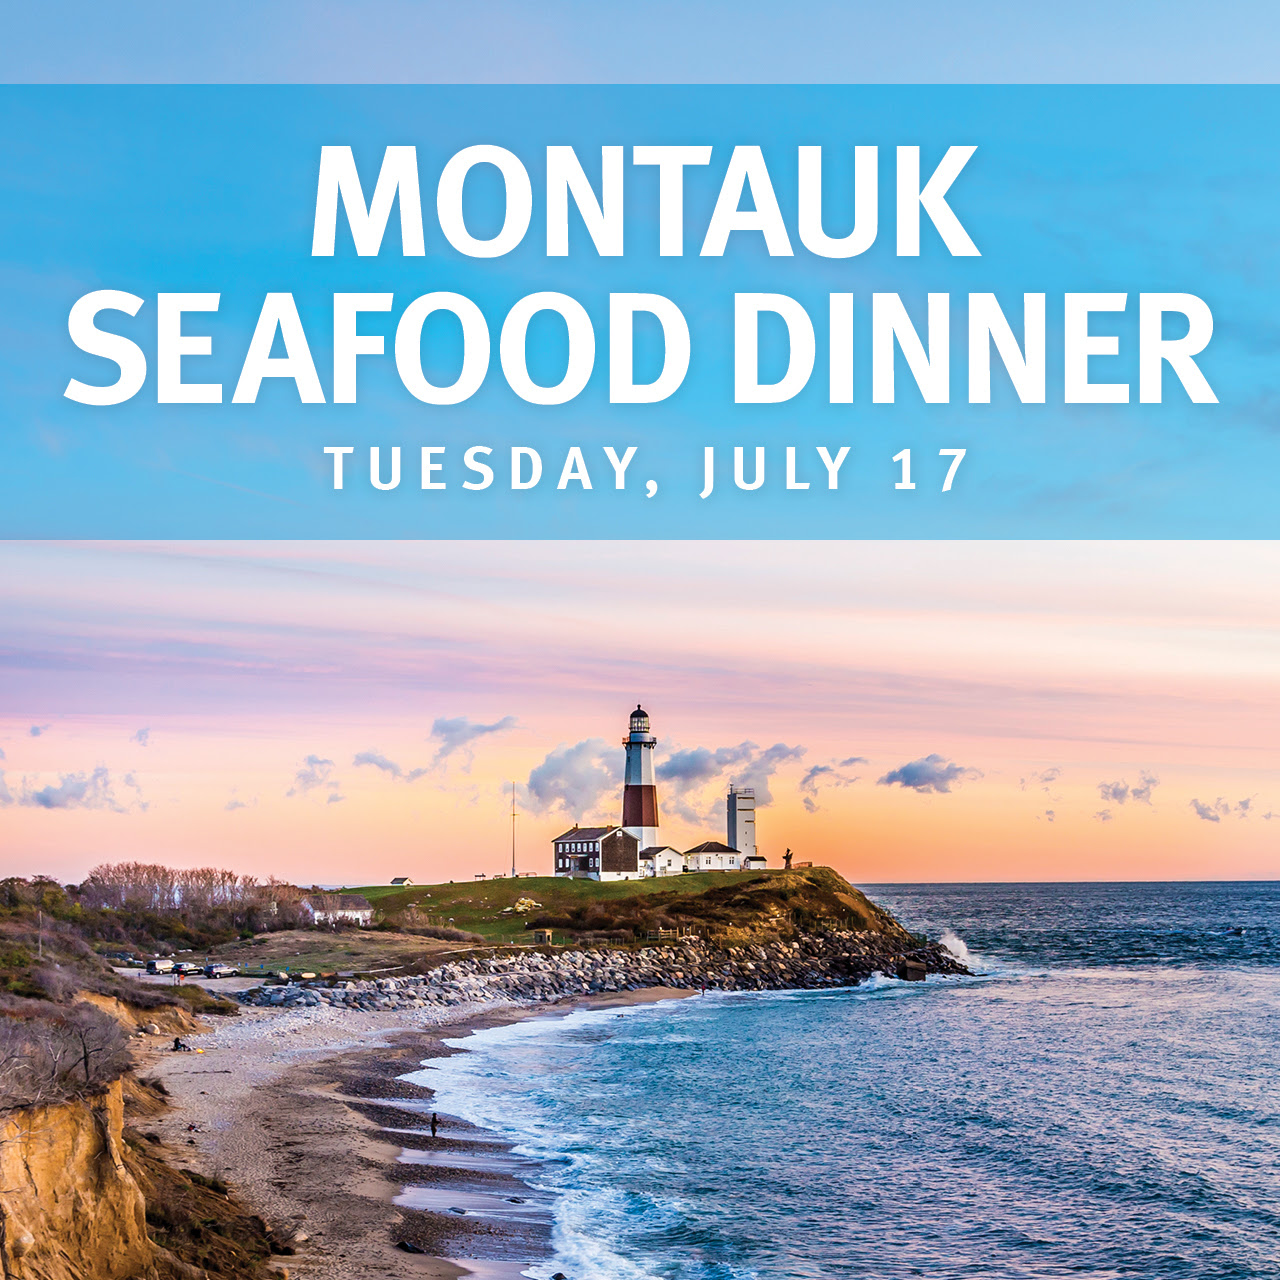 Montauk Seafood Dinner | Tuesday, July 17